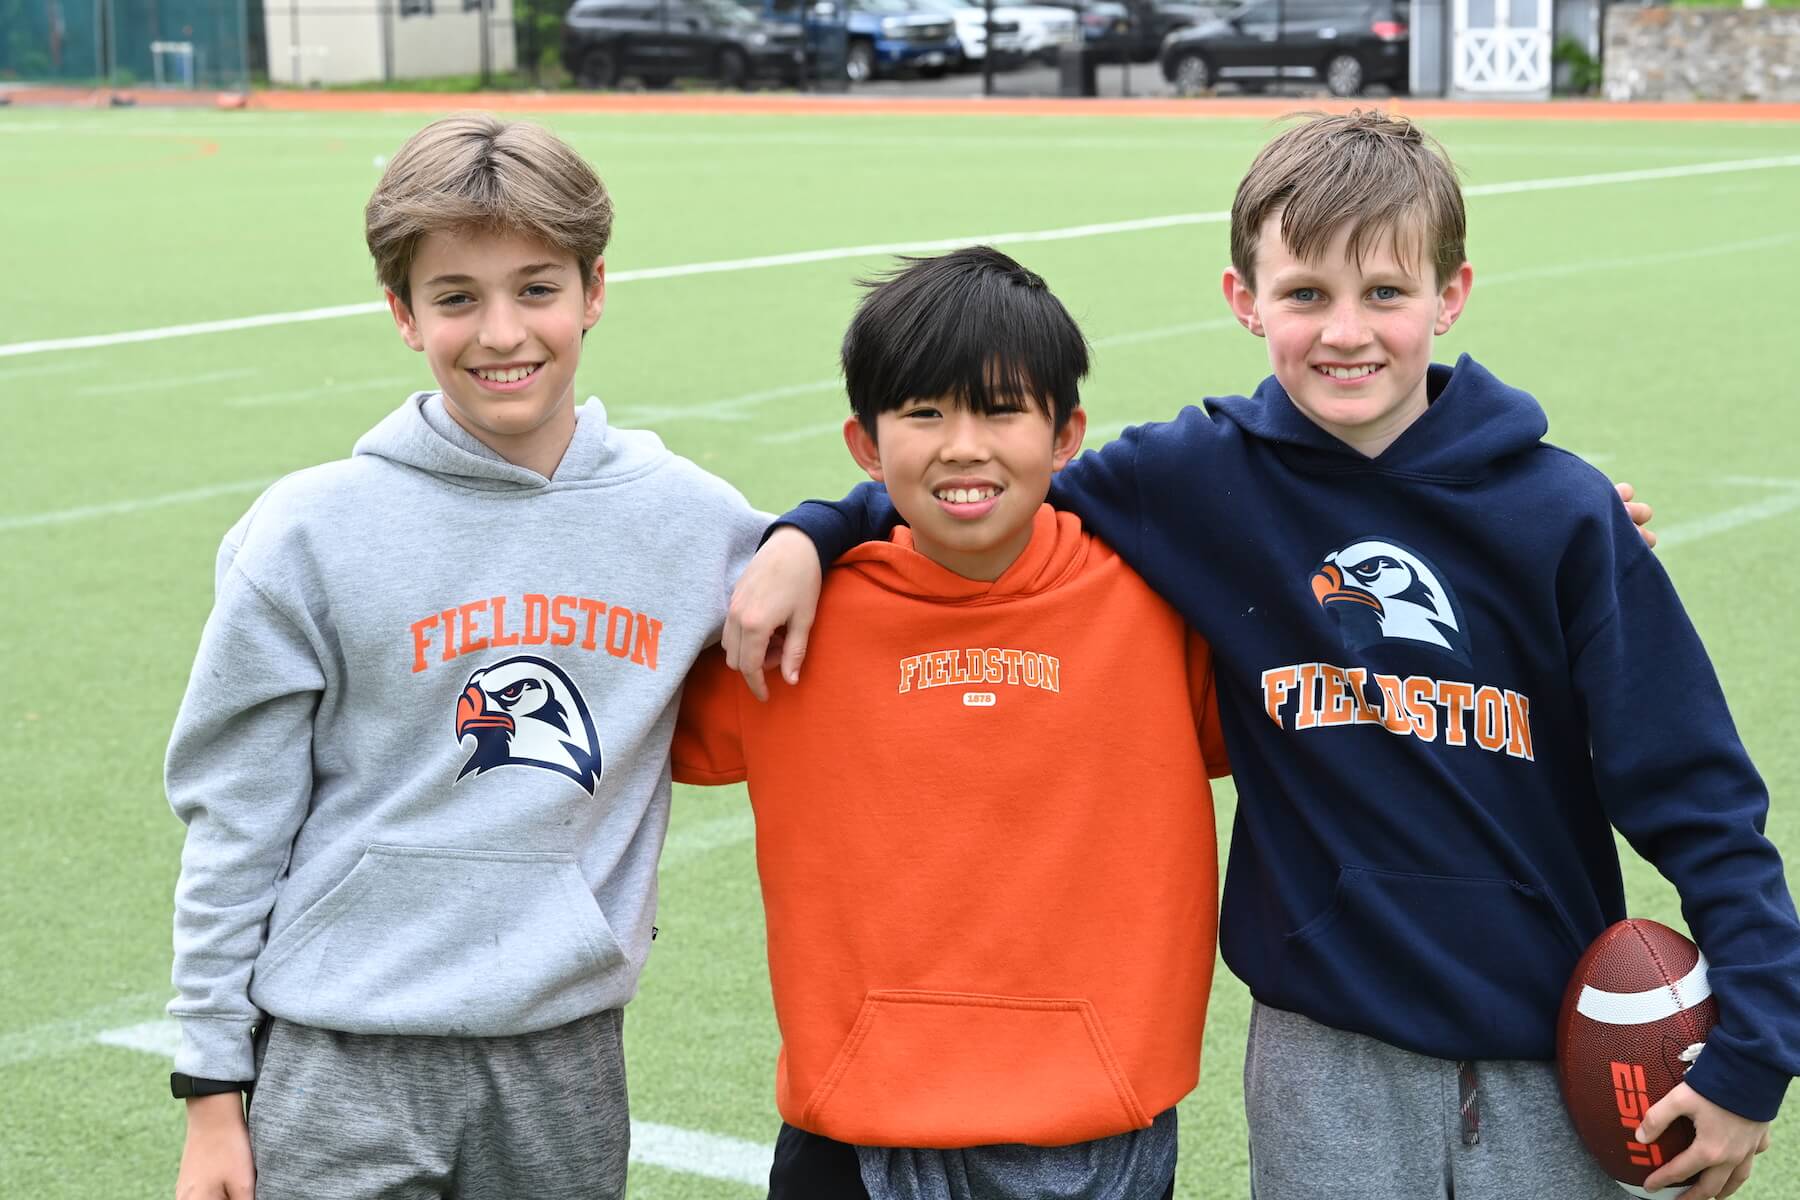 Ethical Culture Fieldston School three Middle School students pose for a group shot on the field in their Fieldston gear